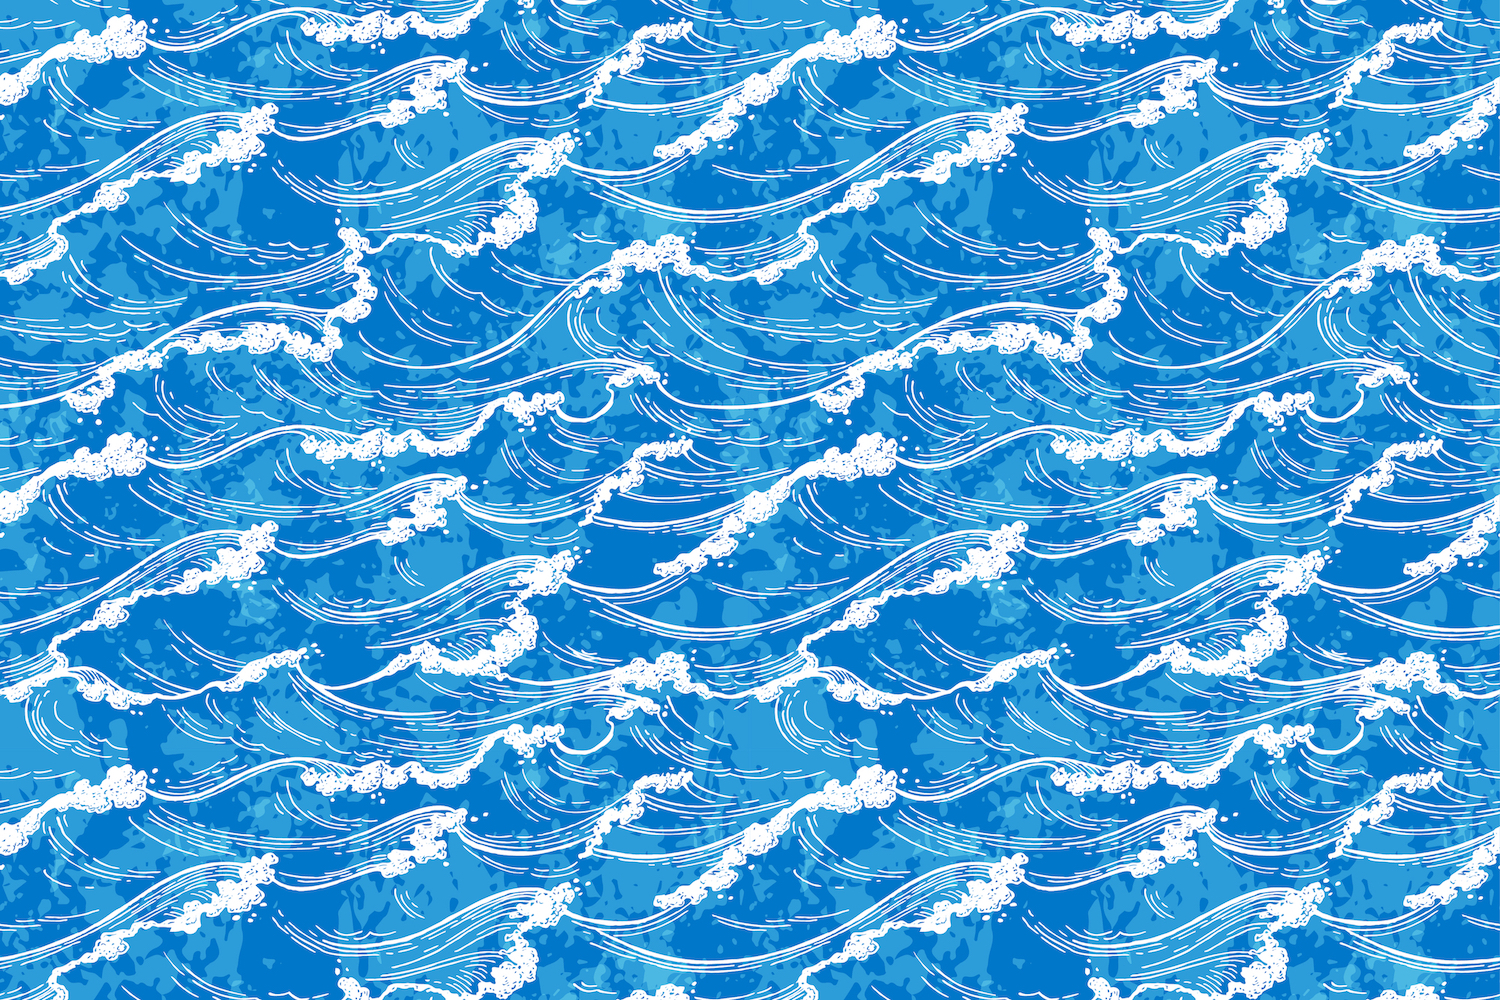 A close-up illustration of waves.